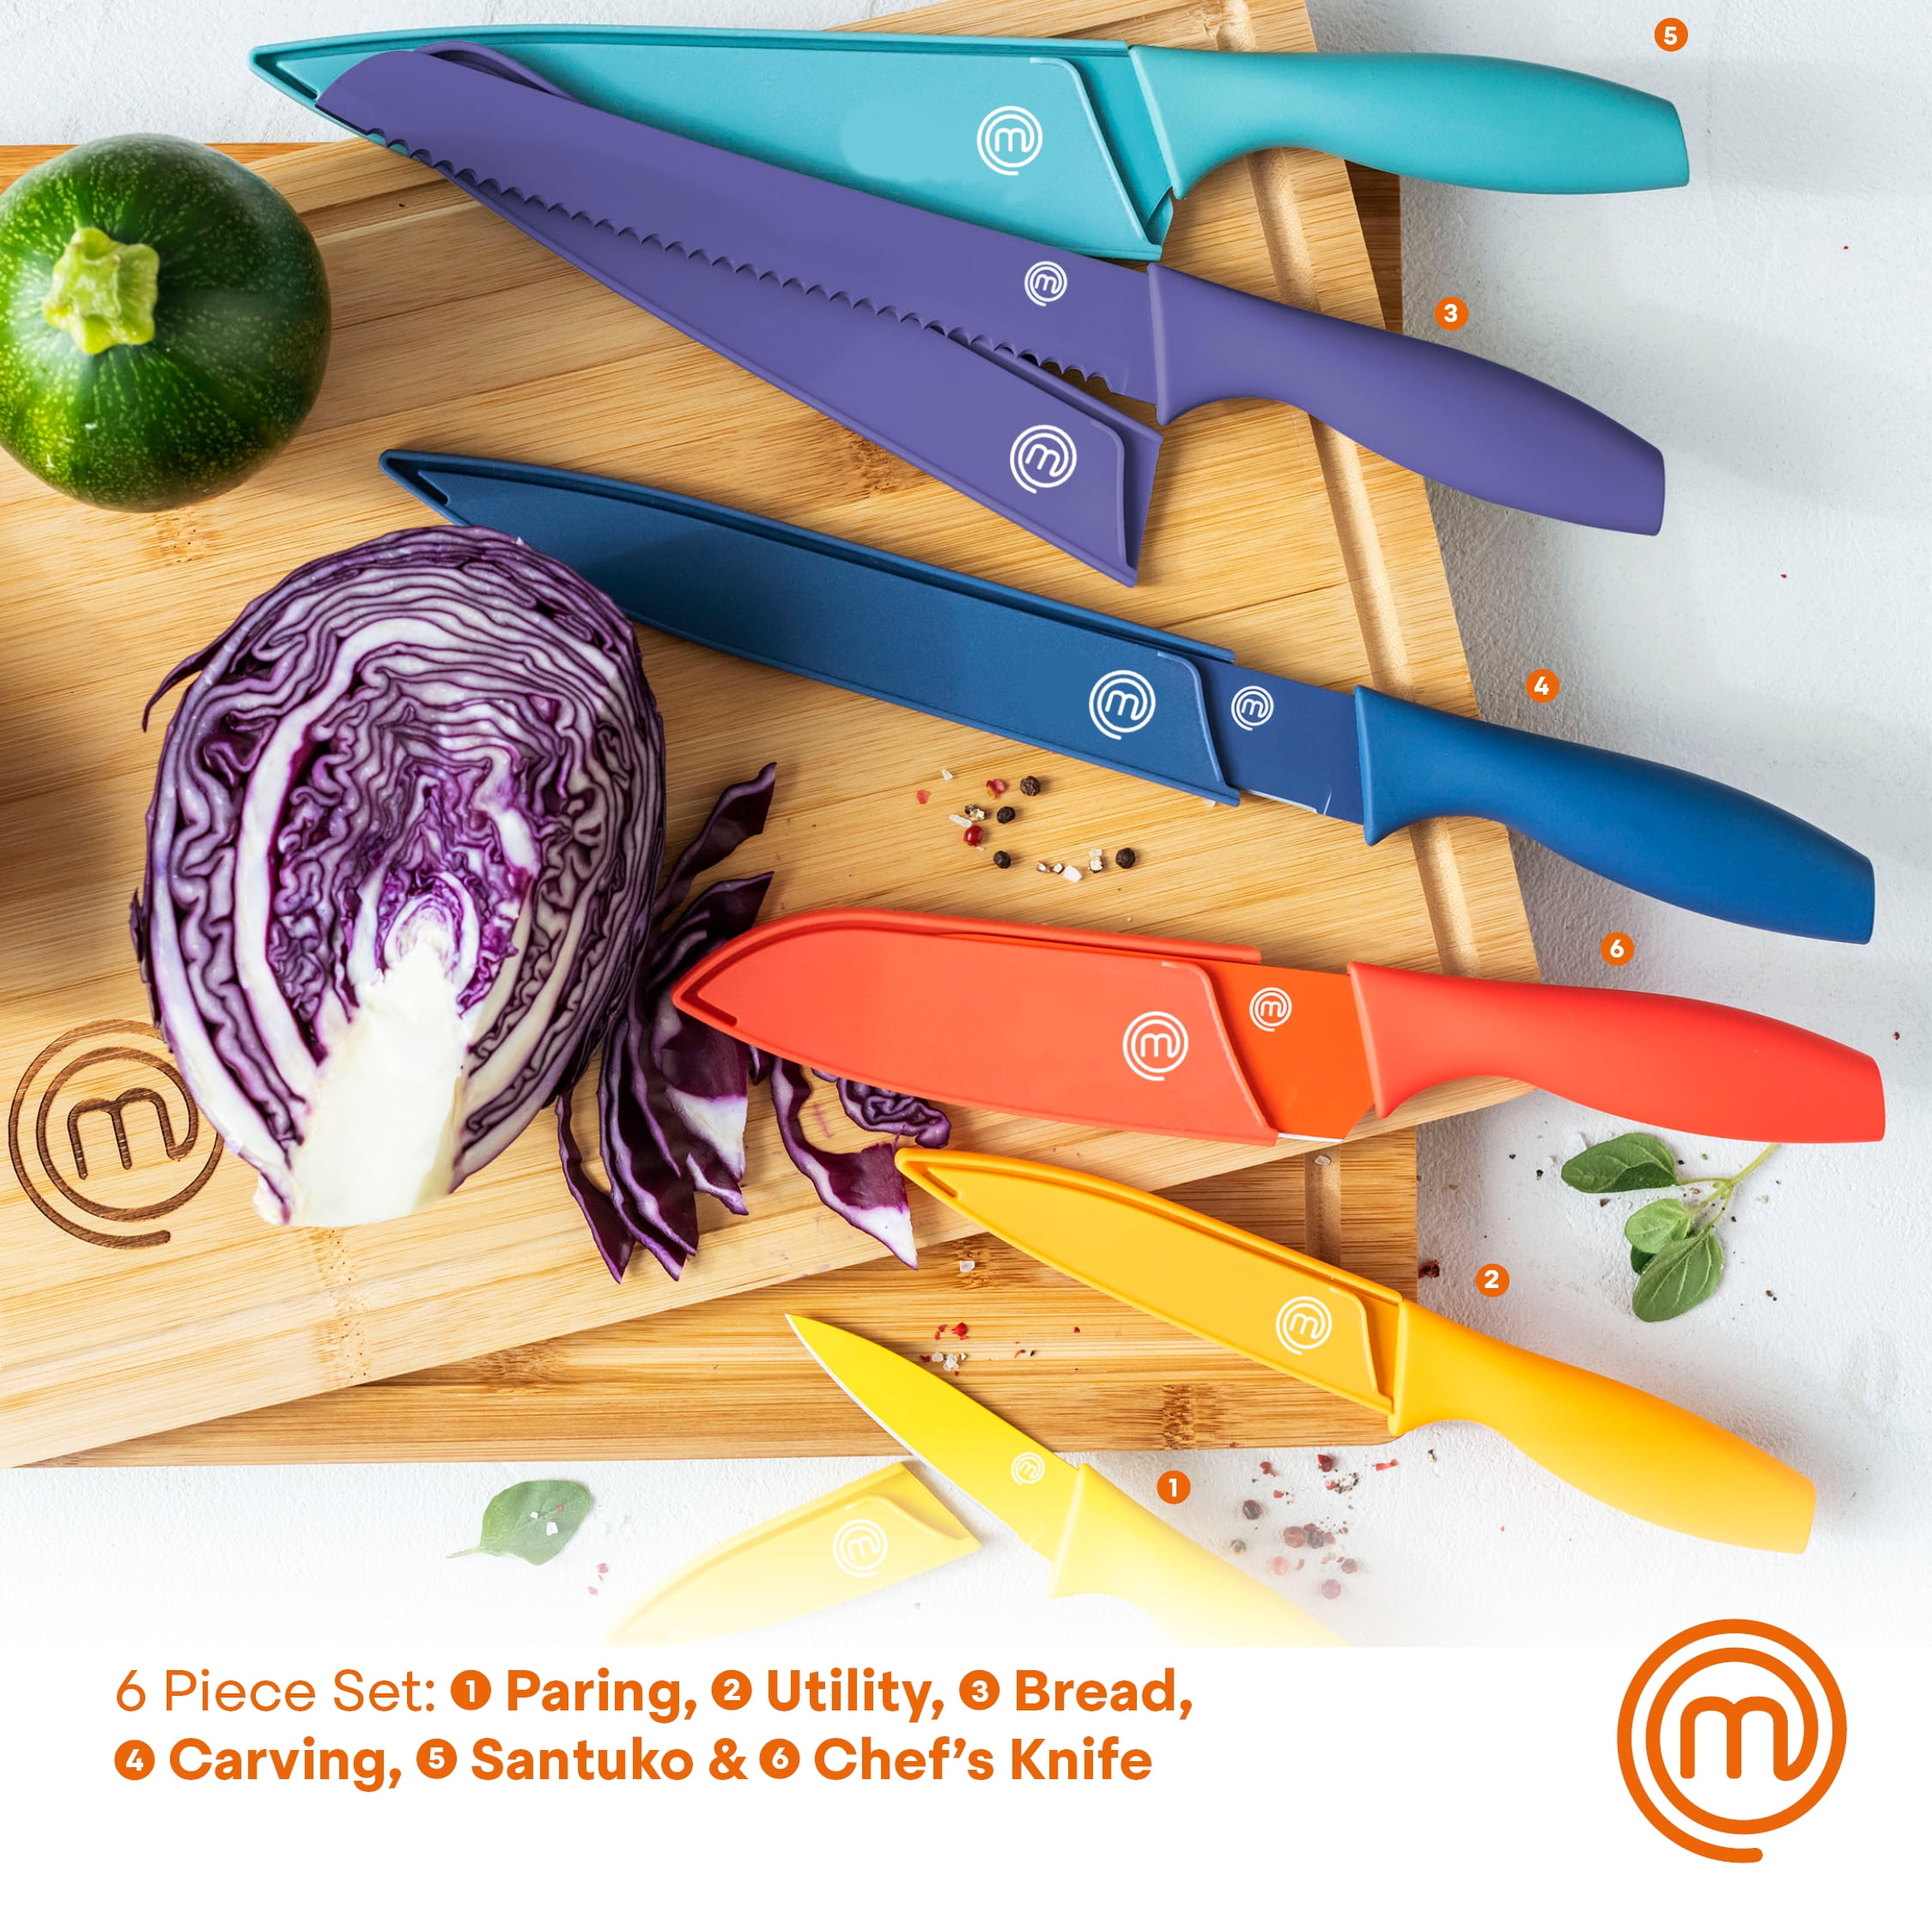 GASTRONOMY by Joy: Limited Edition MasterChef Knives at Rustan's Supermarket